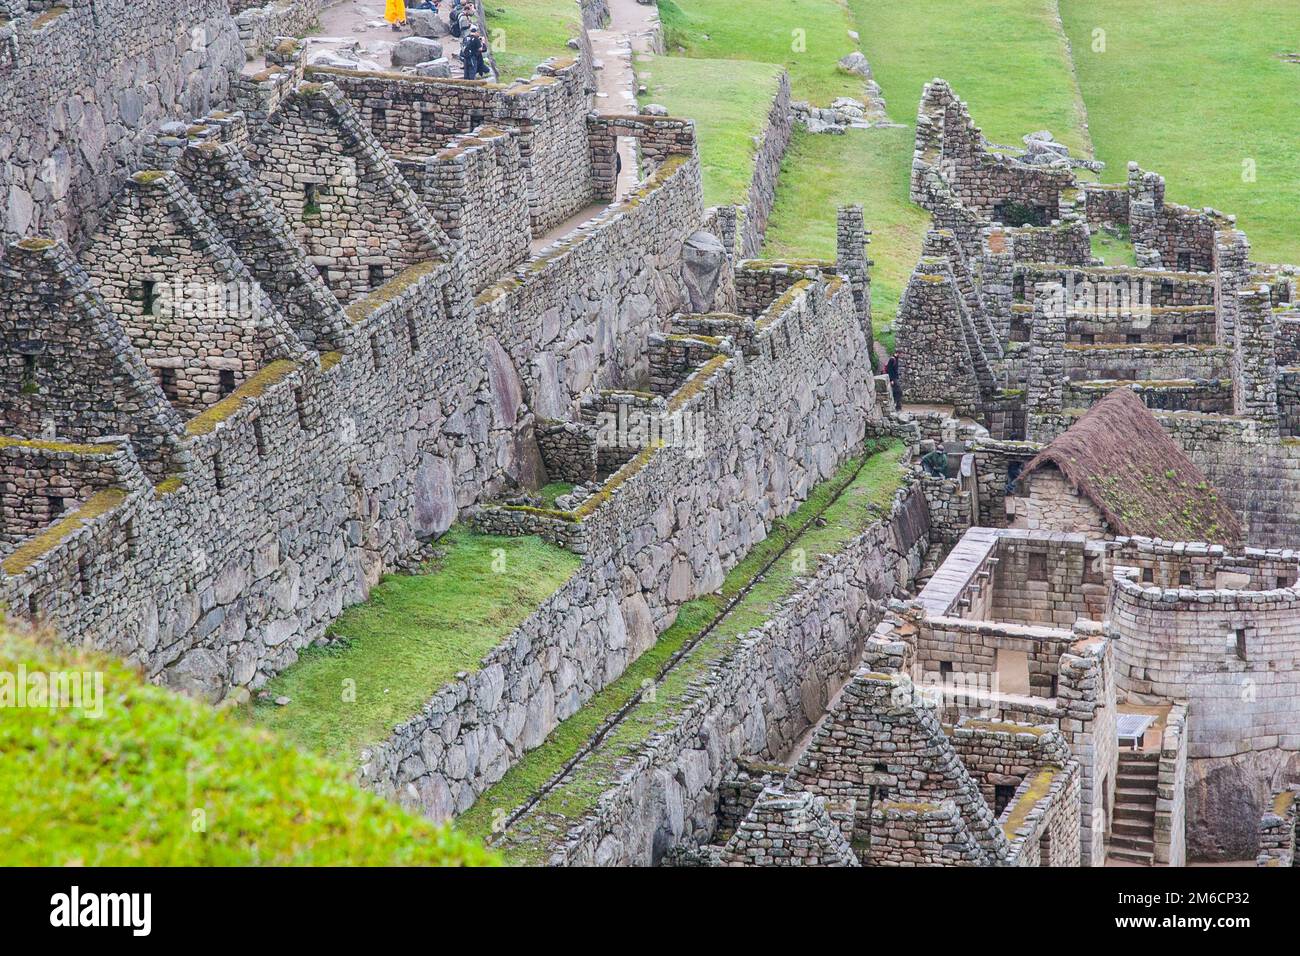 Ruins of houses and farming Inca terraces. Stock Photo